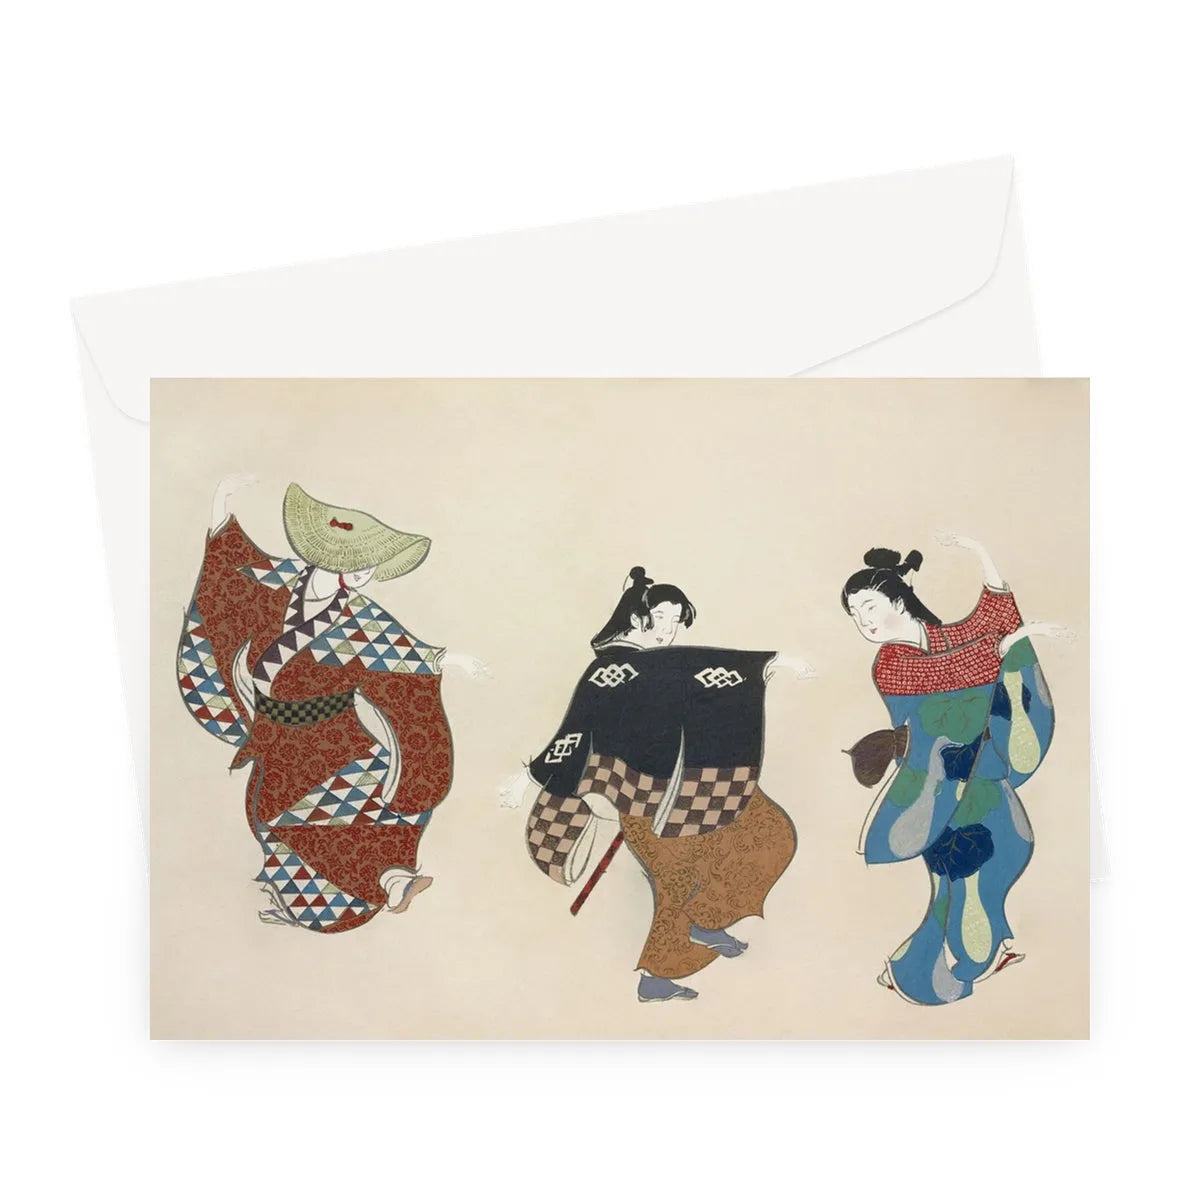 Dancers By Kamisaka Sekka Greeting Card - A5 Landscape / 1 Card - Greeting & Note Cards - Aesthetic Art